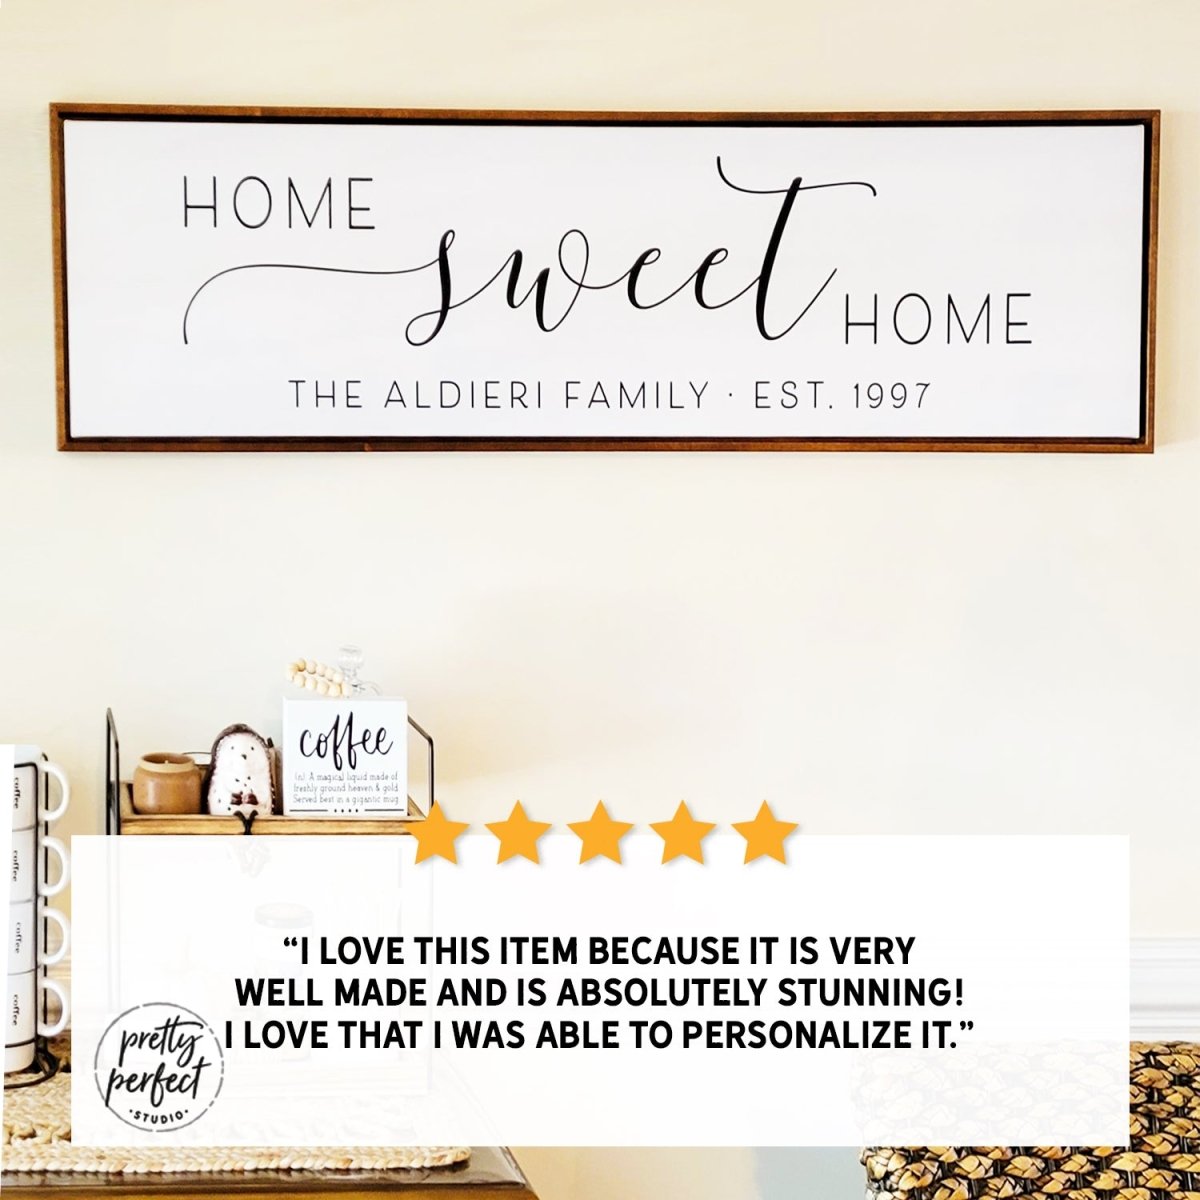 Customer product review for personalized home sweet home sign by Pretty Perfect Studio